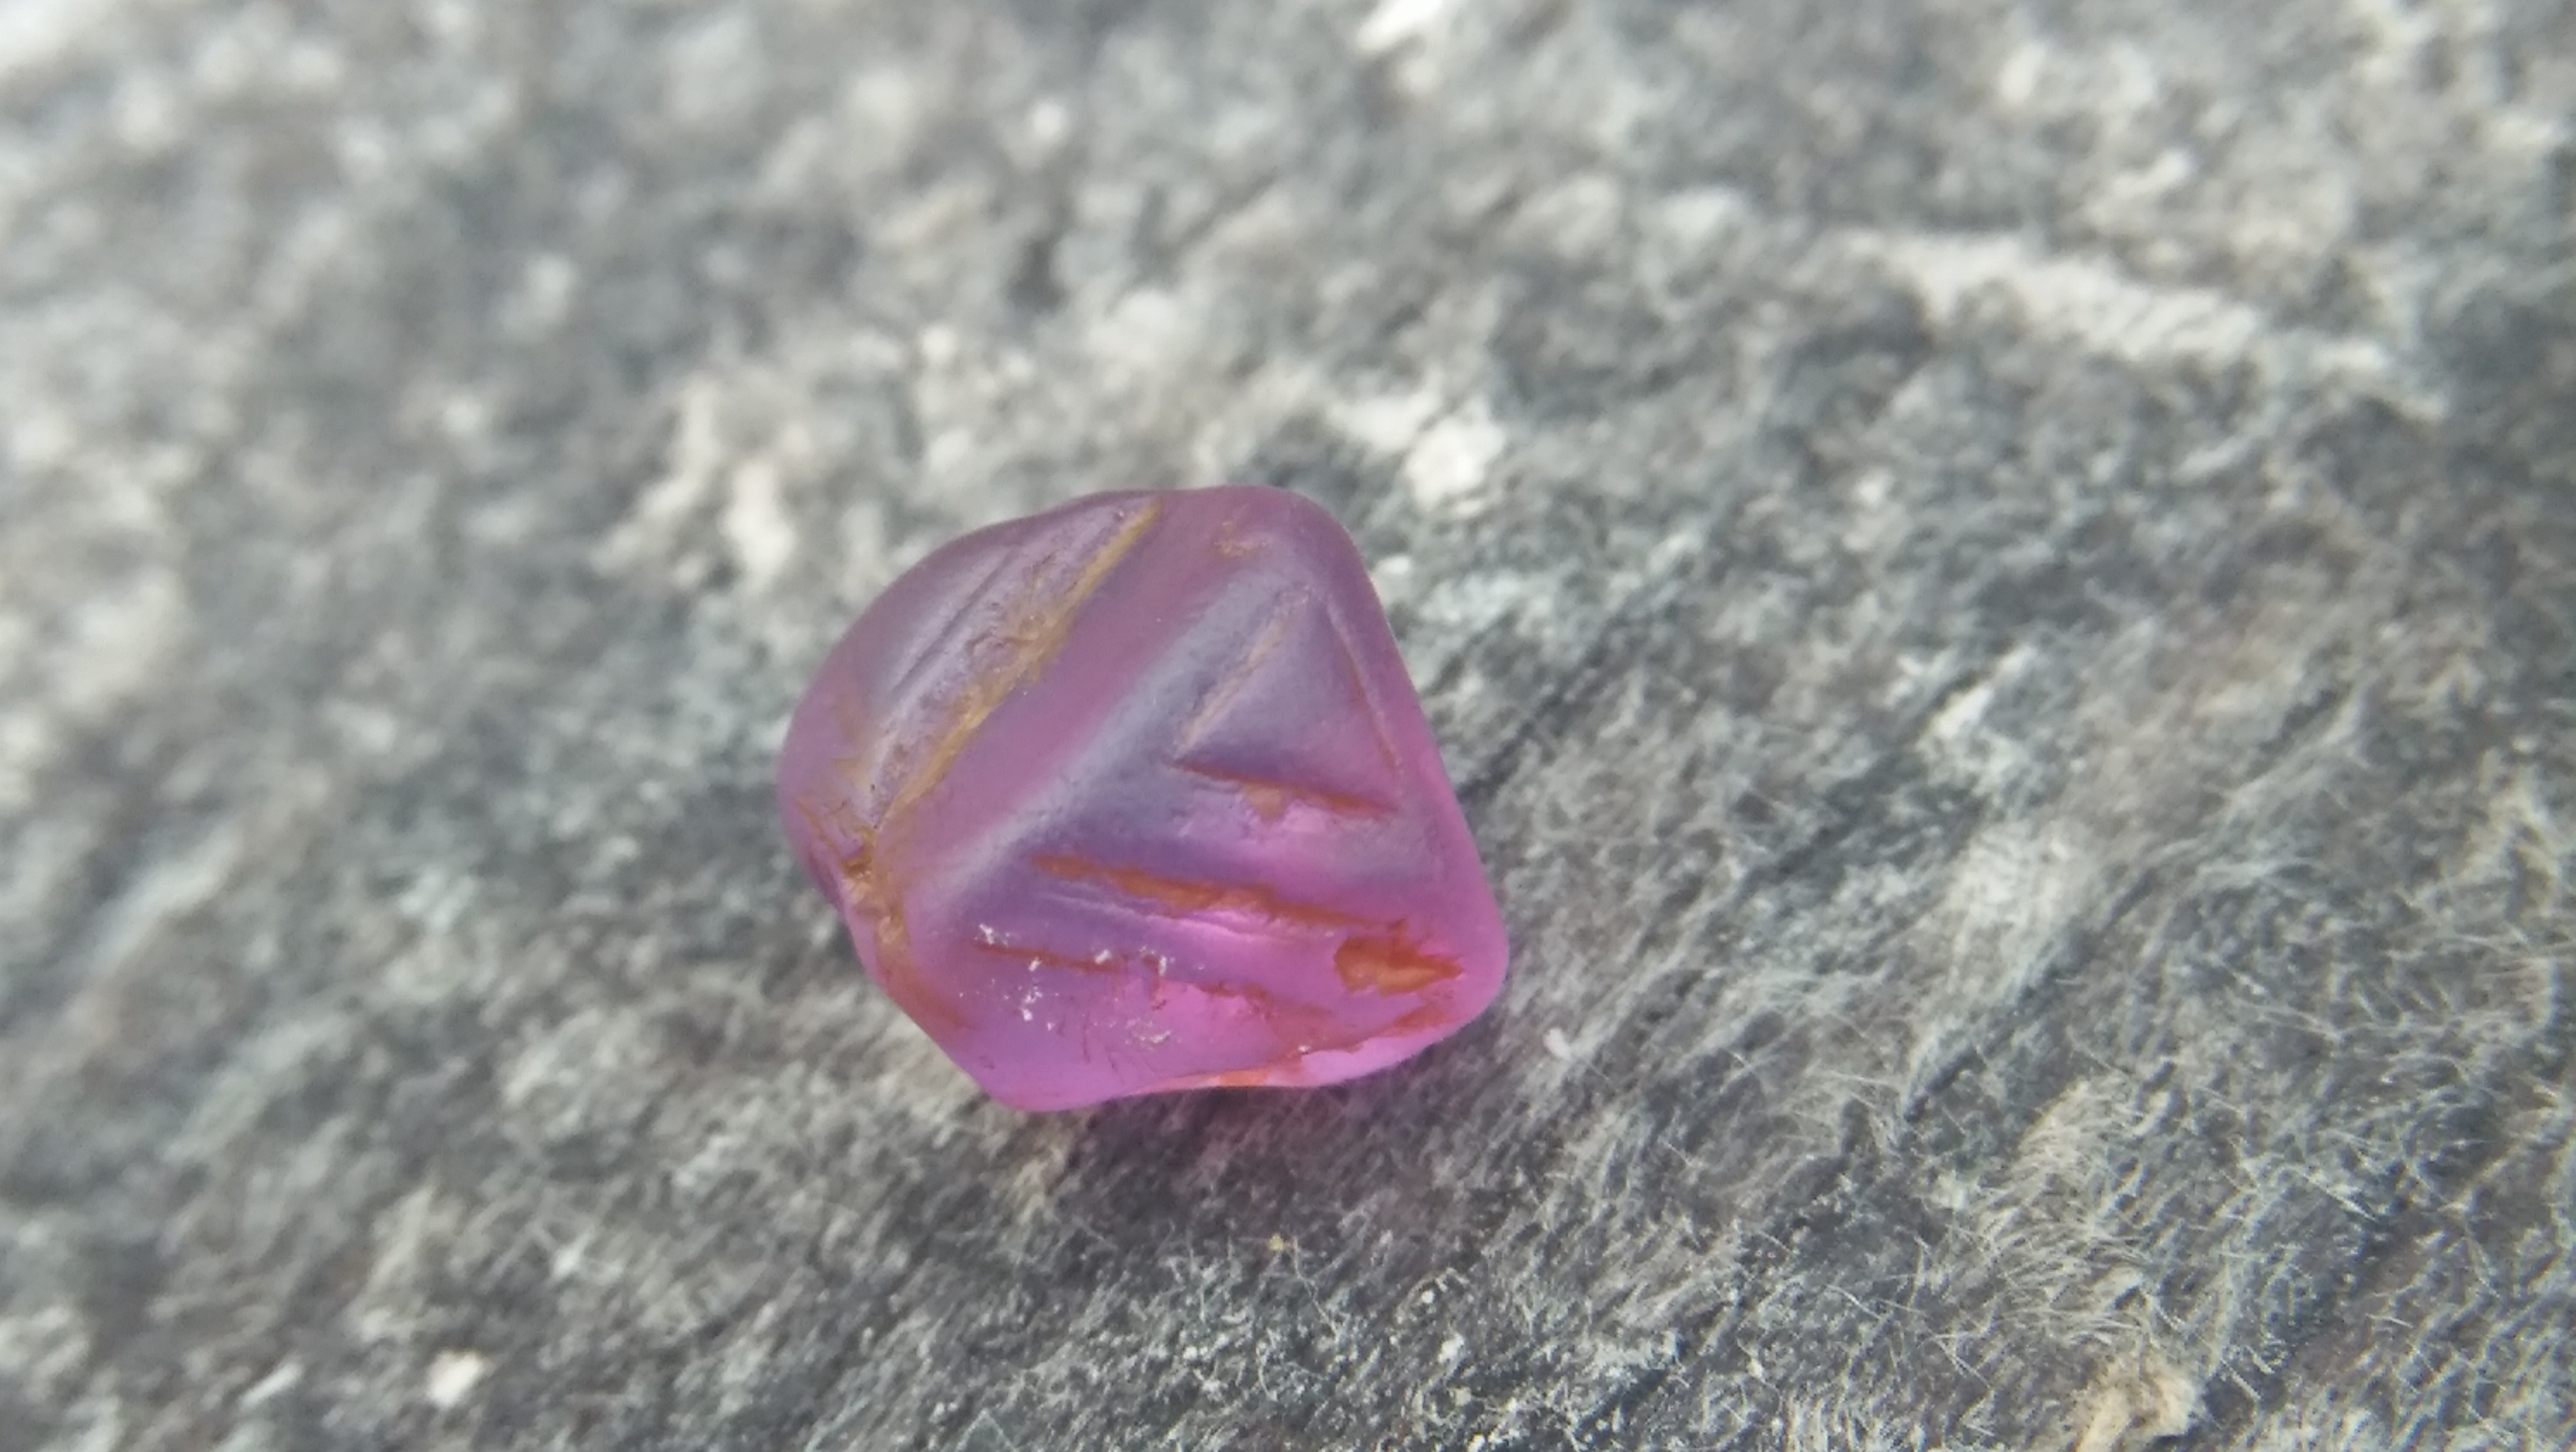 Trigon Δ 😘 Fresh from the mineral ® 🇱🇰 CEYLON Natural spinel Crystal with trigon , 7.5mm x 6.1mm x 5.3mm dimension stone unearthed from city of gem Ratnapura Sri Lanka